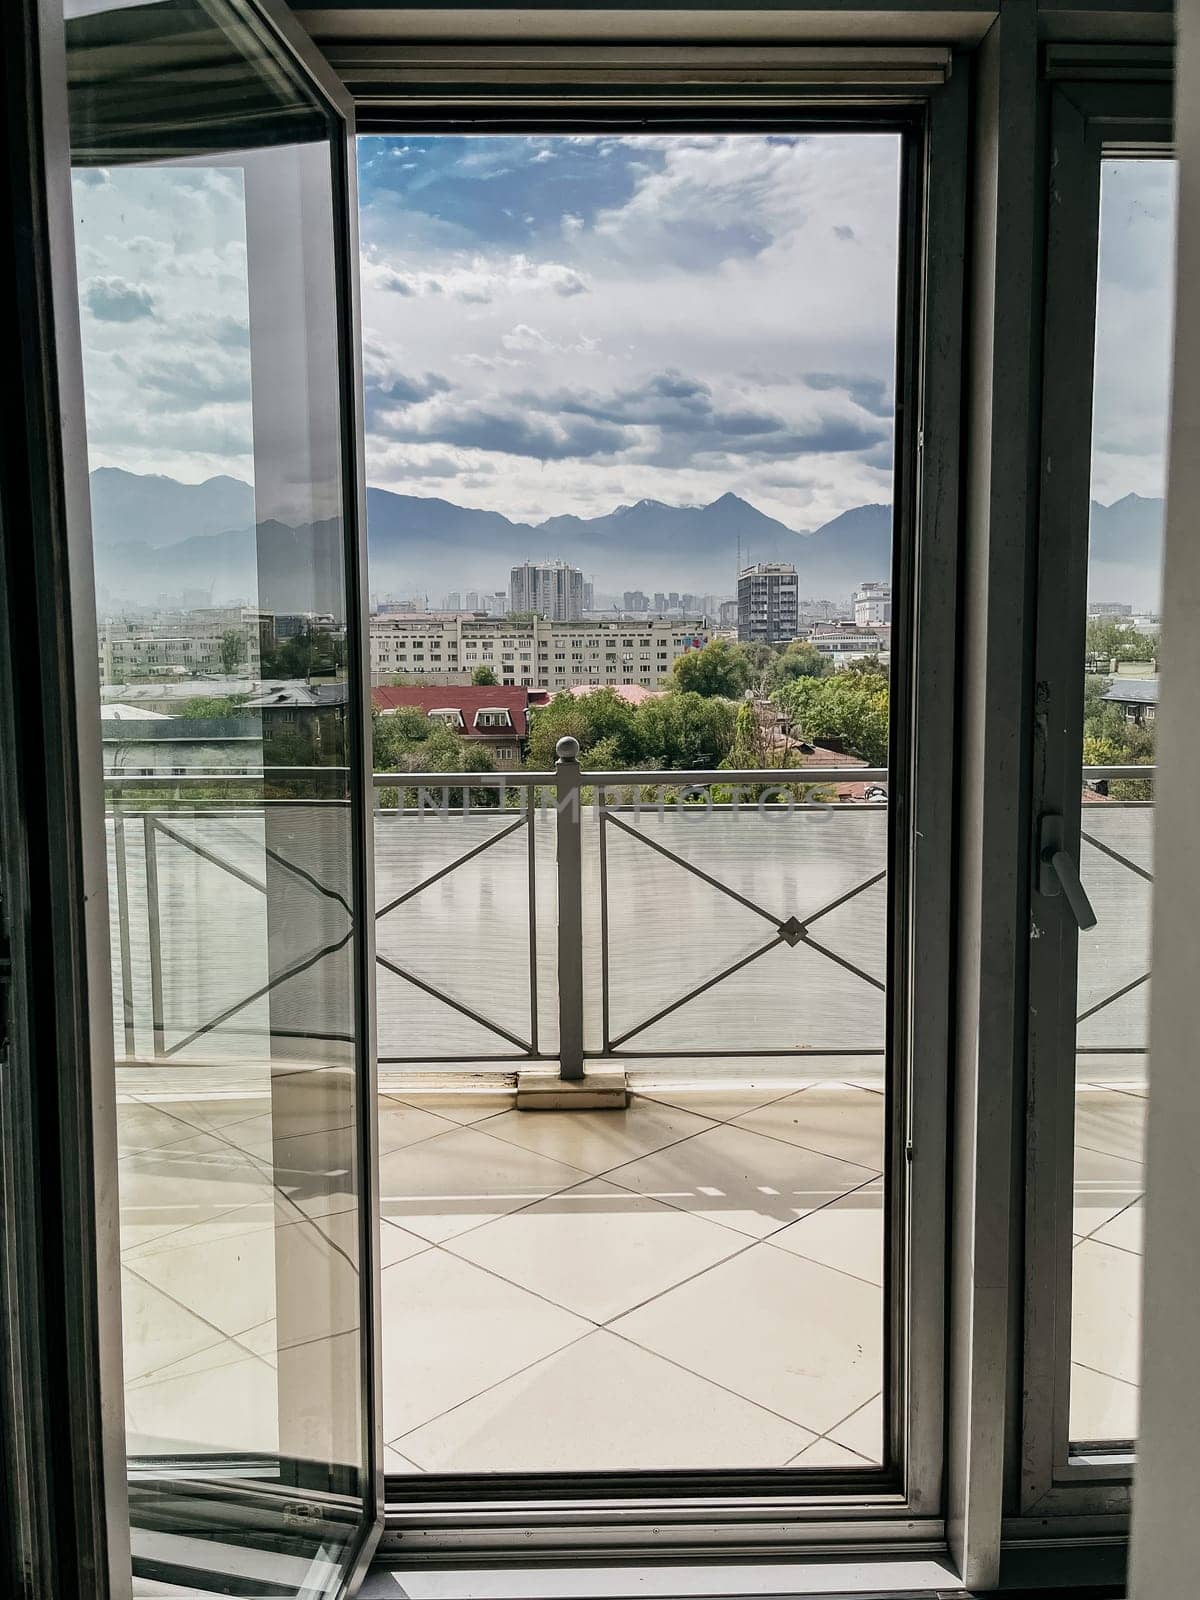 A stunning panoramic view of the city skyline and snow-capped mountains framed by an open door, creating a picturesque scene.